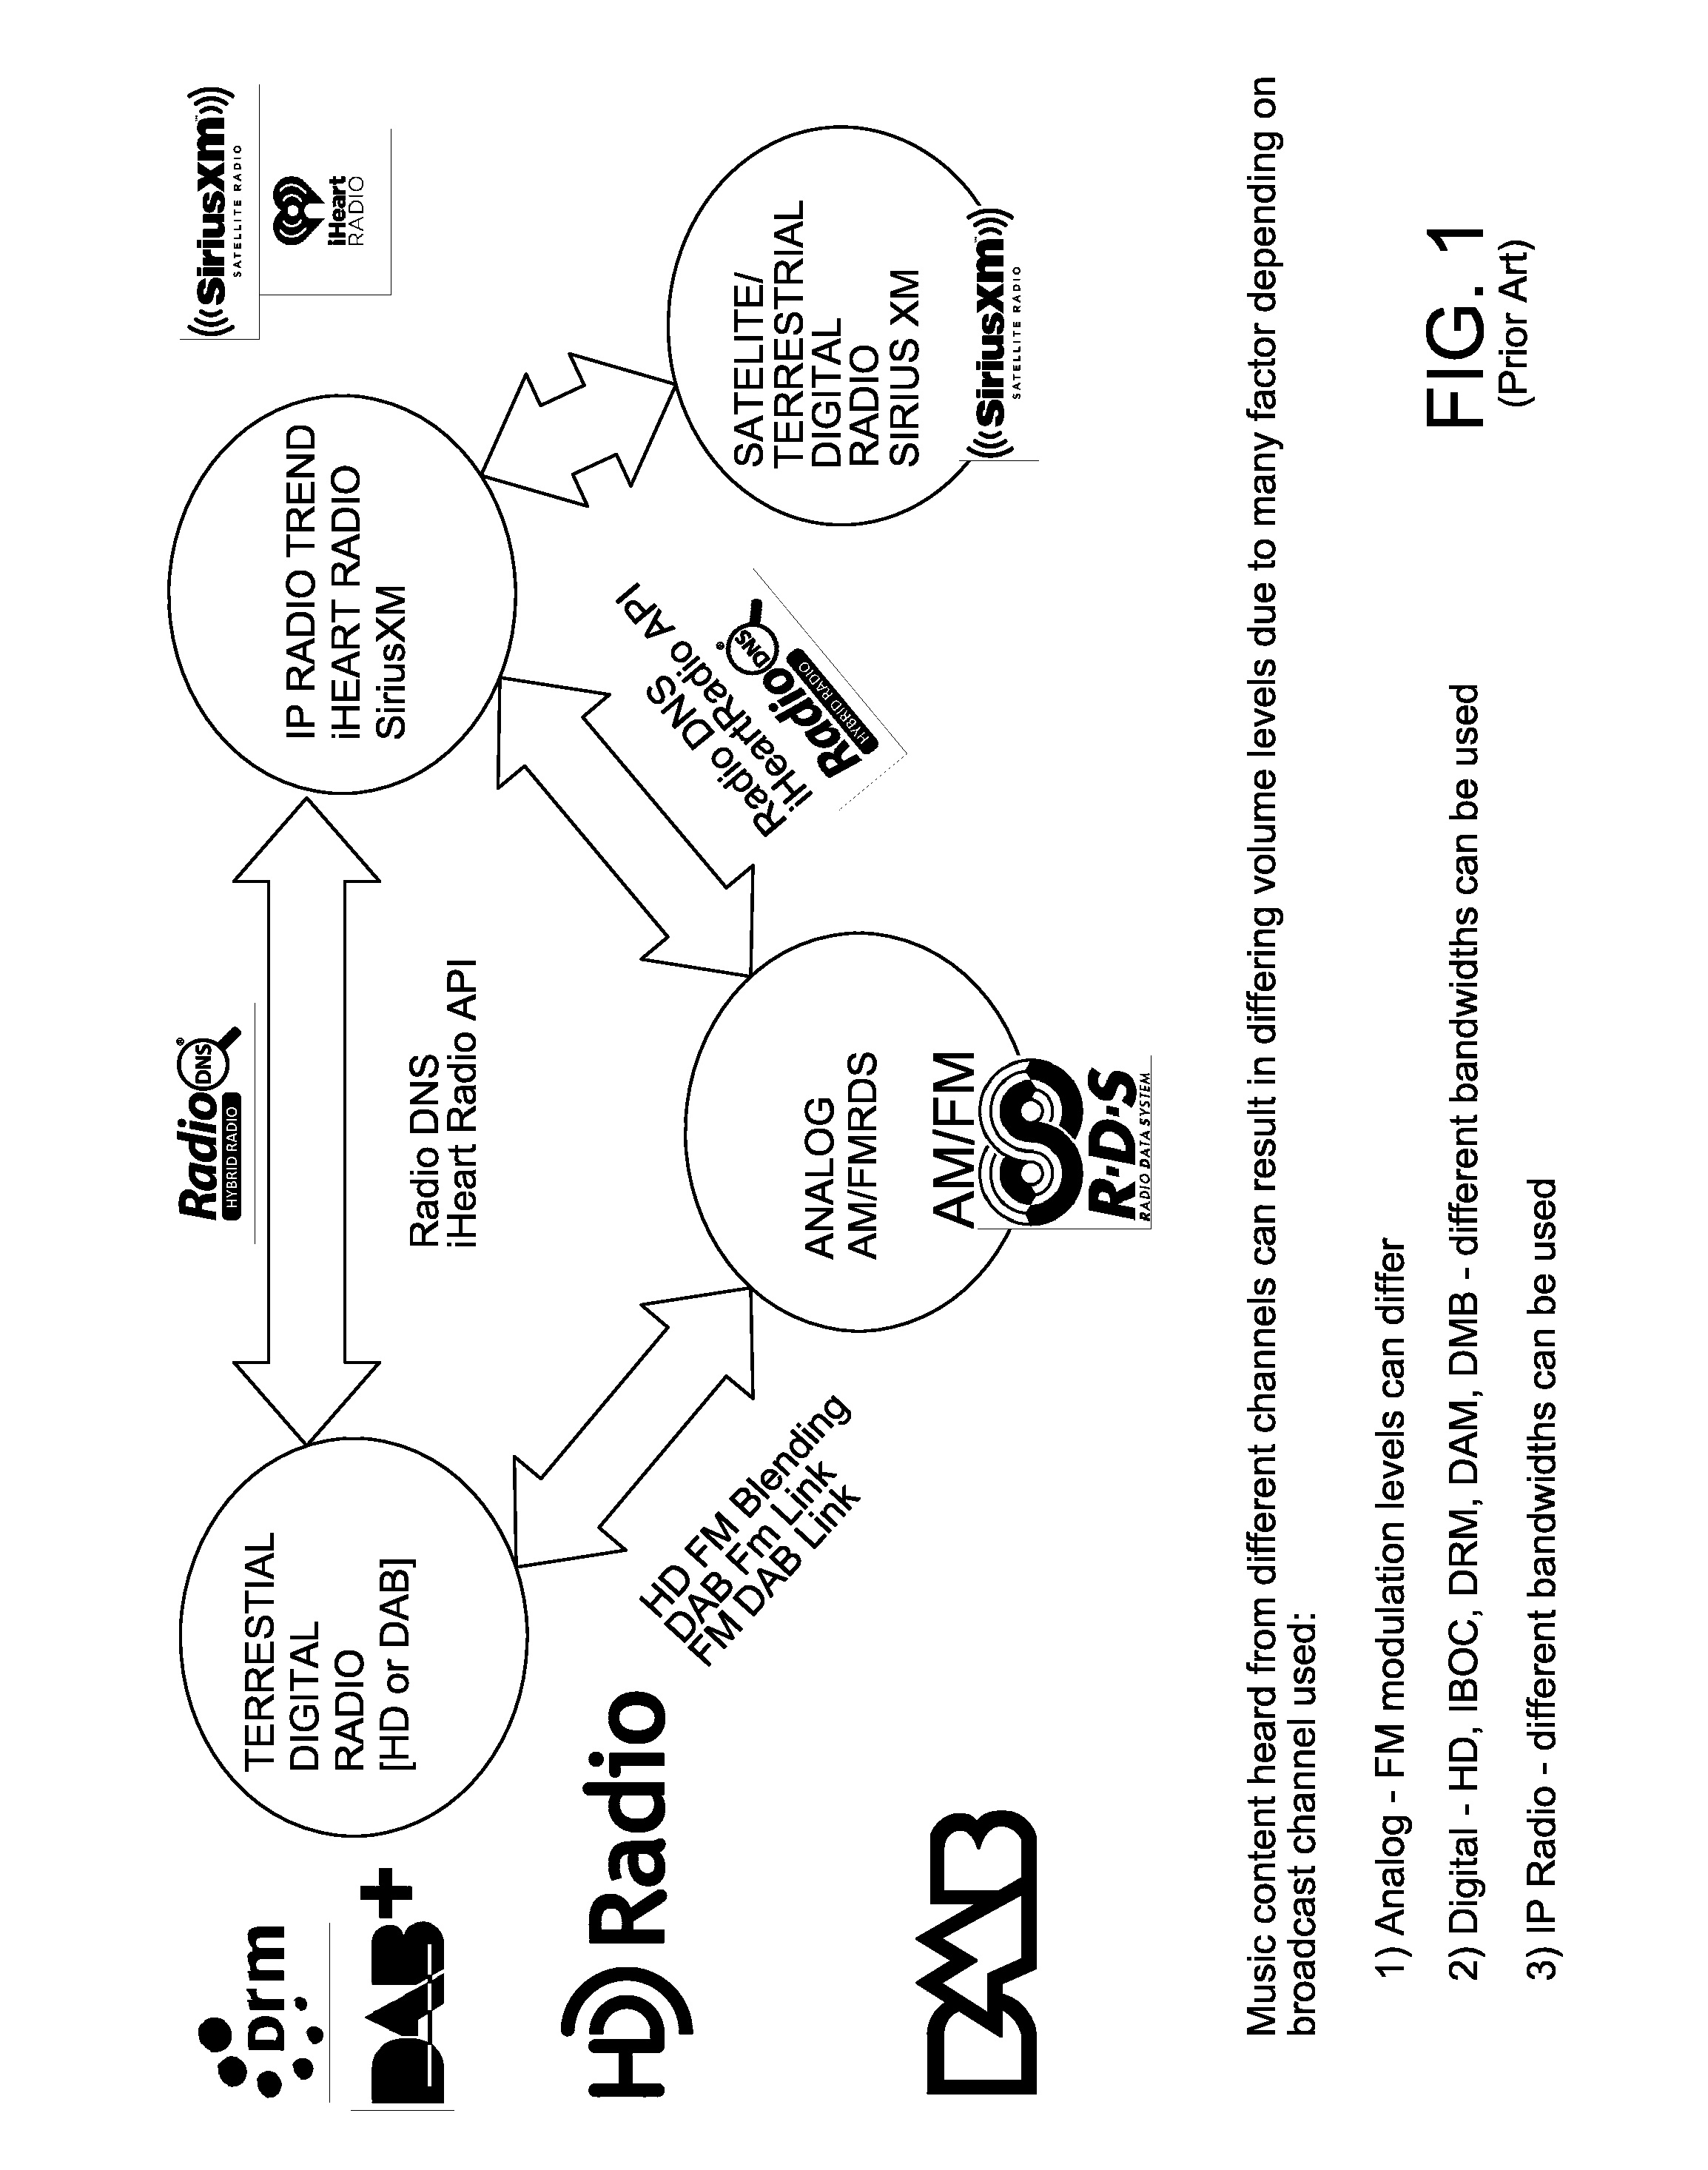 Method and apparatus for mode balance for analog fm, digital radio blend logic in an automotive environment